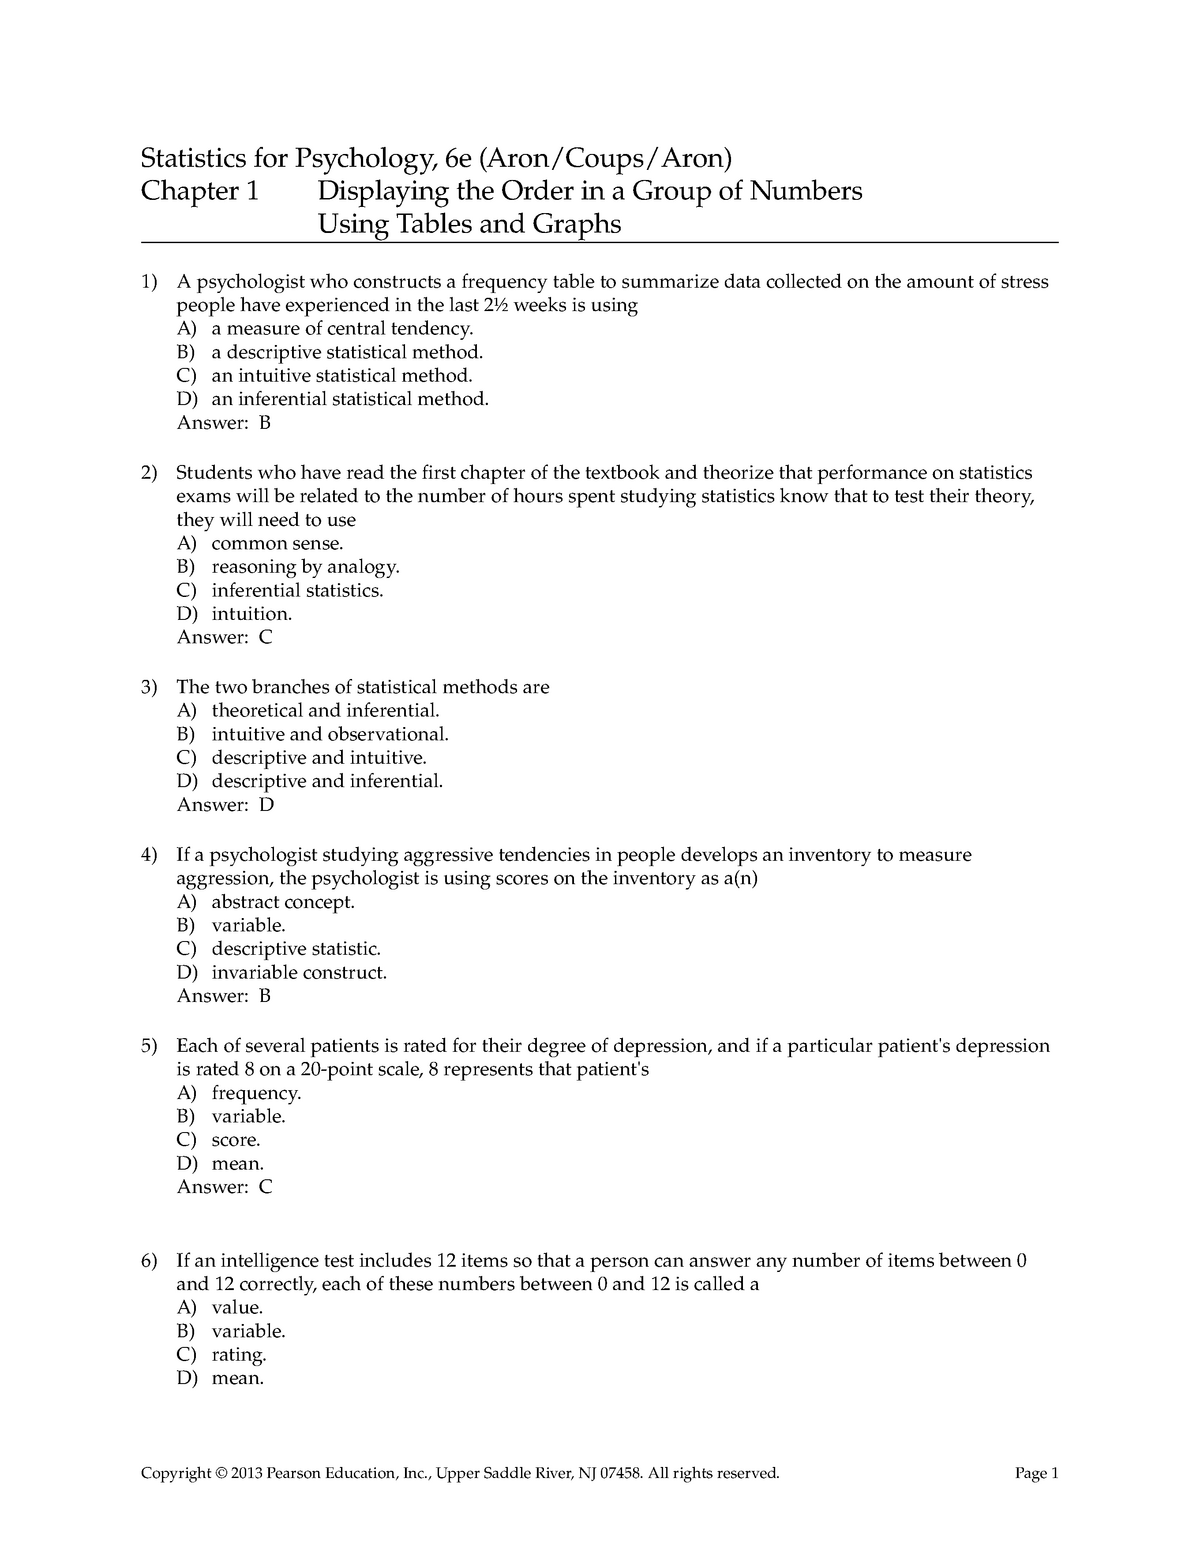 research methods practice questions psychology